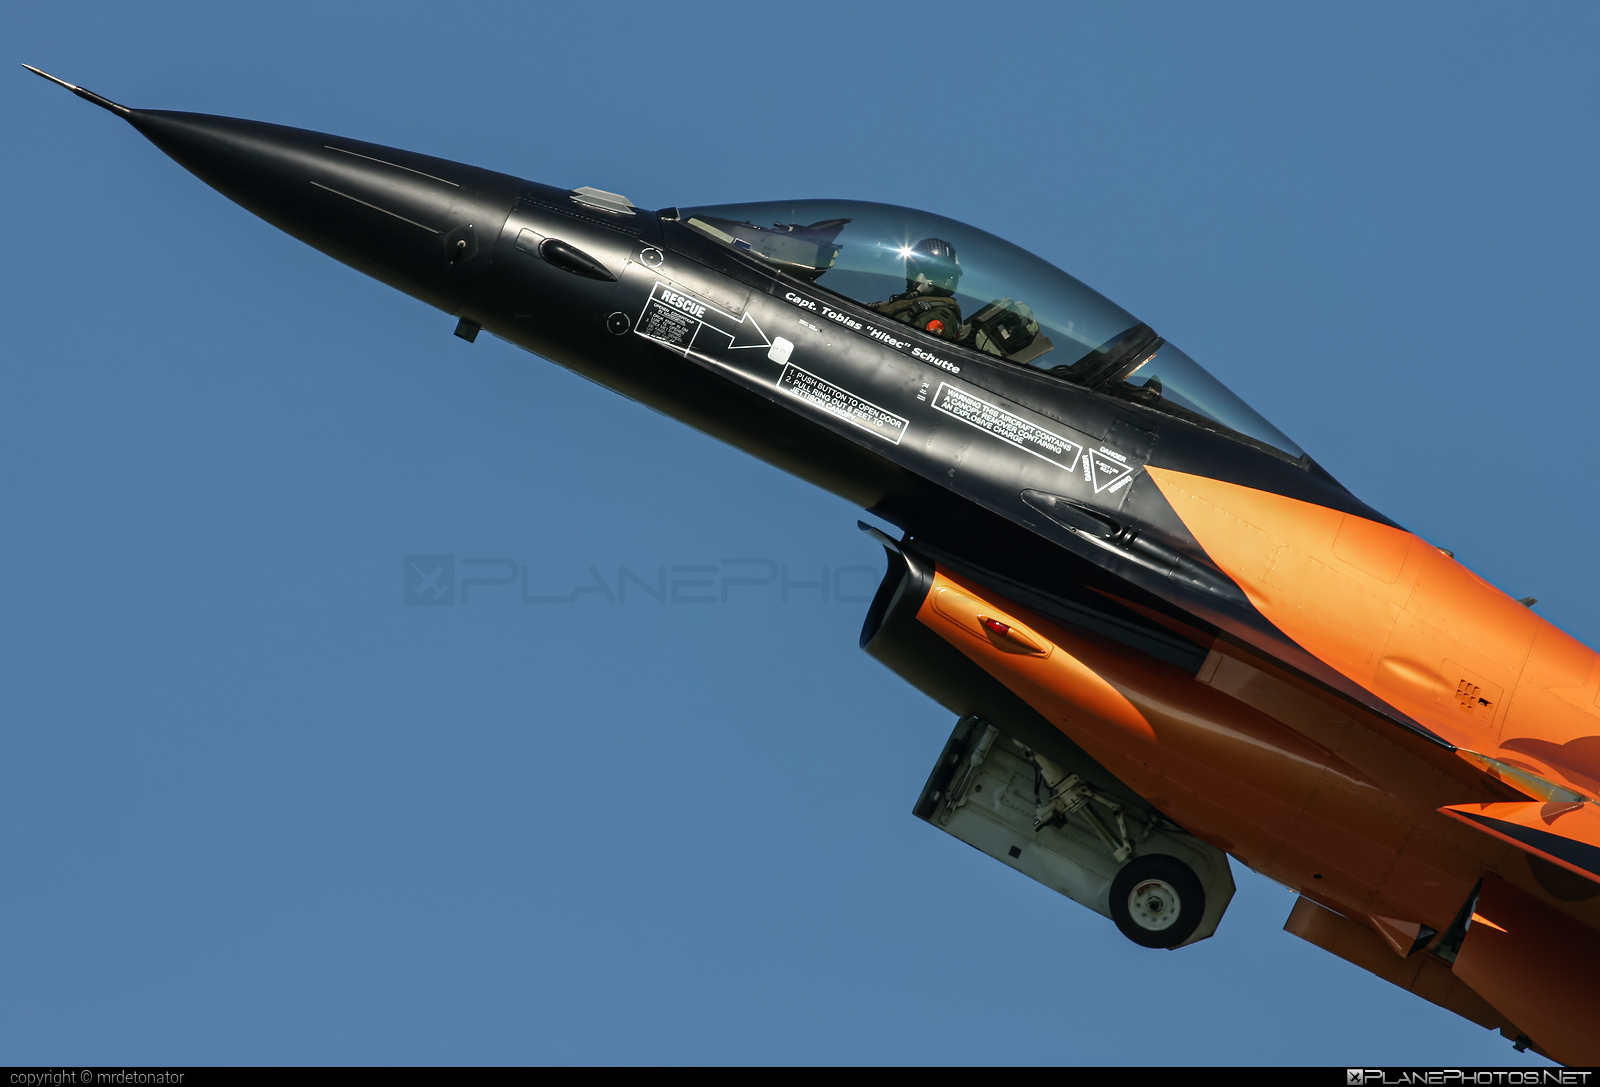 Fokker F-16AM Fighting Falcon - J-015 operated by Koninklijke Luchtmacht (Royal Netherlands Air Force) #dnh2010 #f16 #f16am #fightingfalcon #fokker #koninklijkeluchtmacht #royalnetherlandsairforce